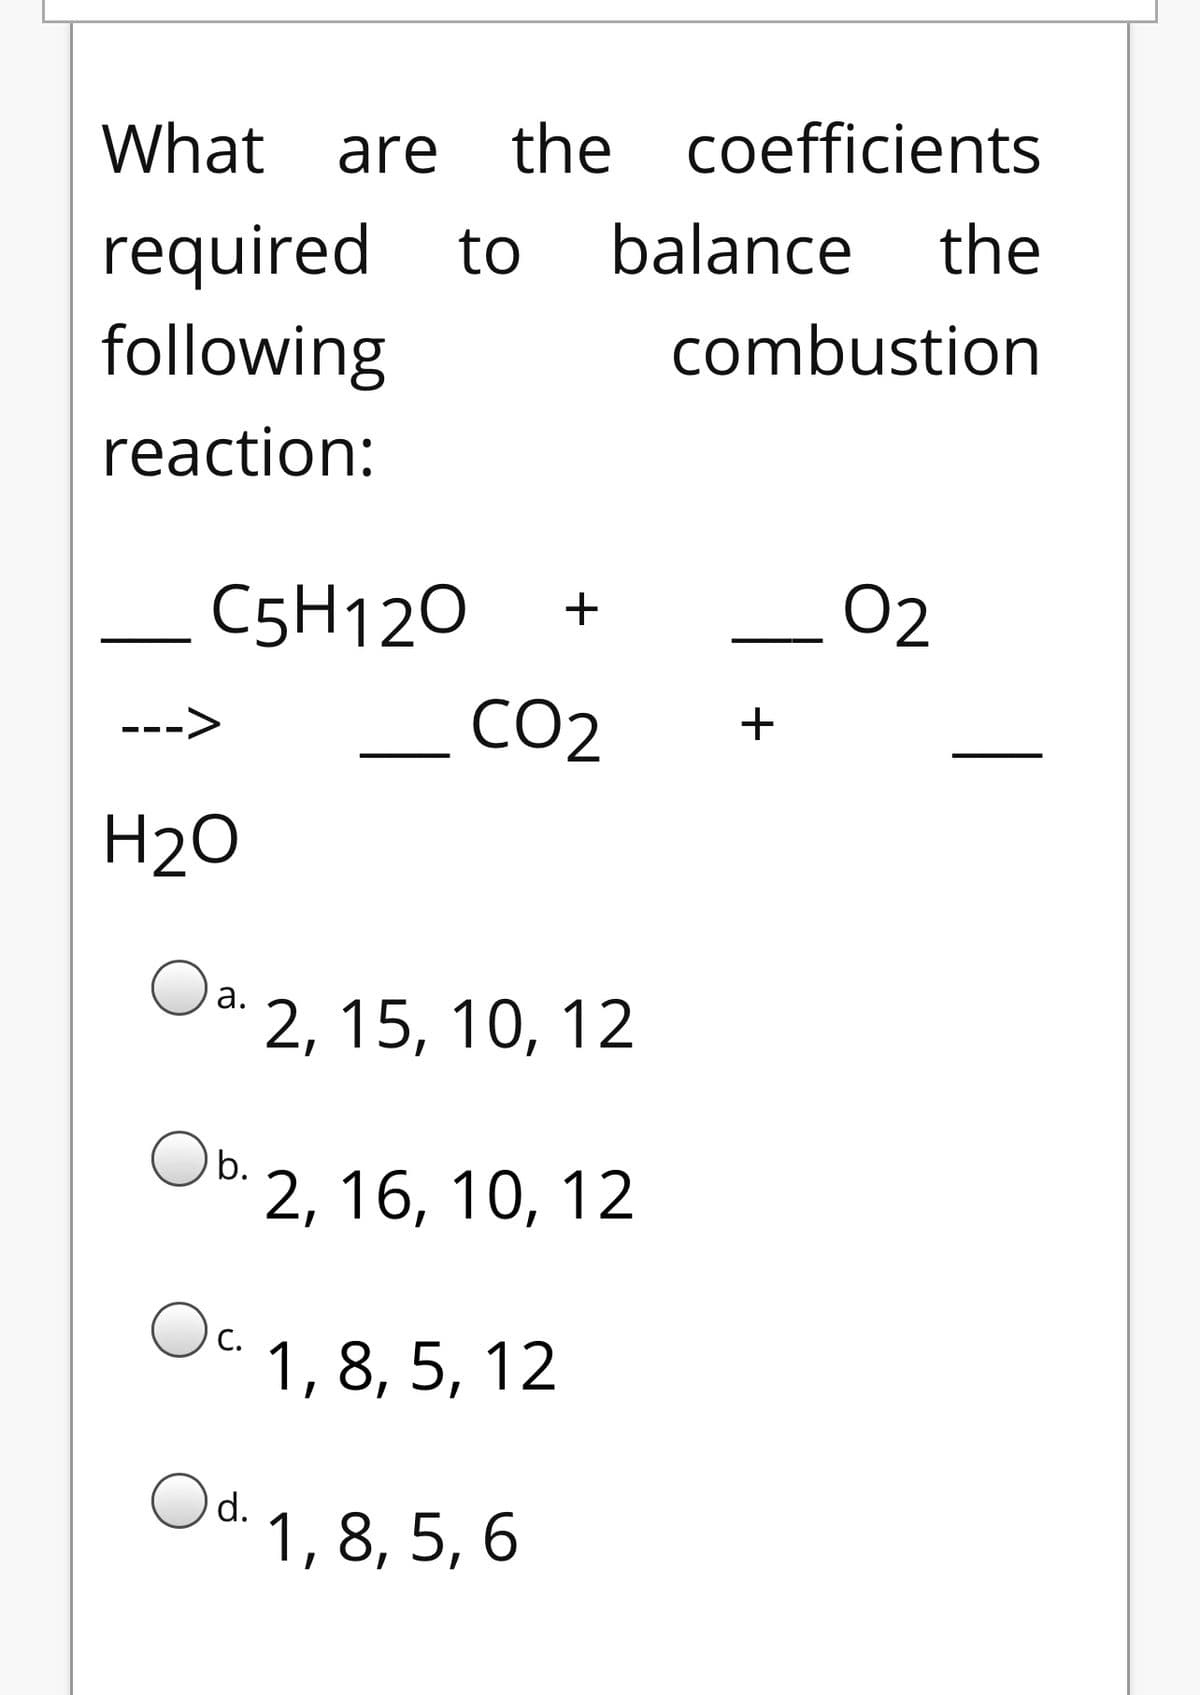 What are
the coefficients
required to
balance
the
following
combustion
reaction:
C5H120
+
02
CO2
--->
H2O
Oa.
2, 15, 10, 12
b.
2, 16, 10, 12
Oc.
1, 8, 5, 12
Od.
1, 8, 5, 6
+
